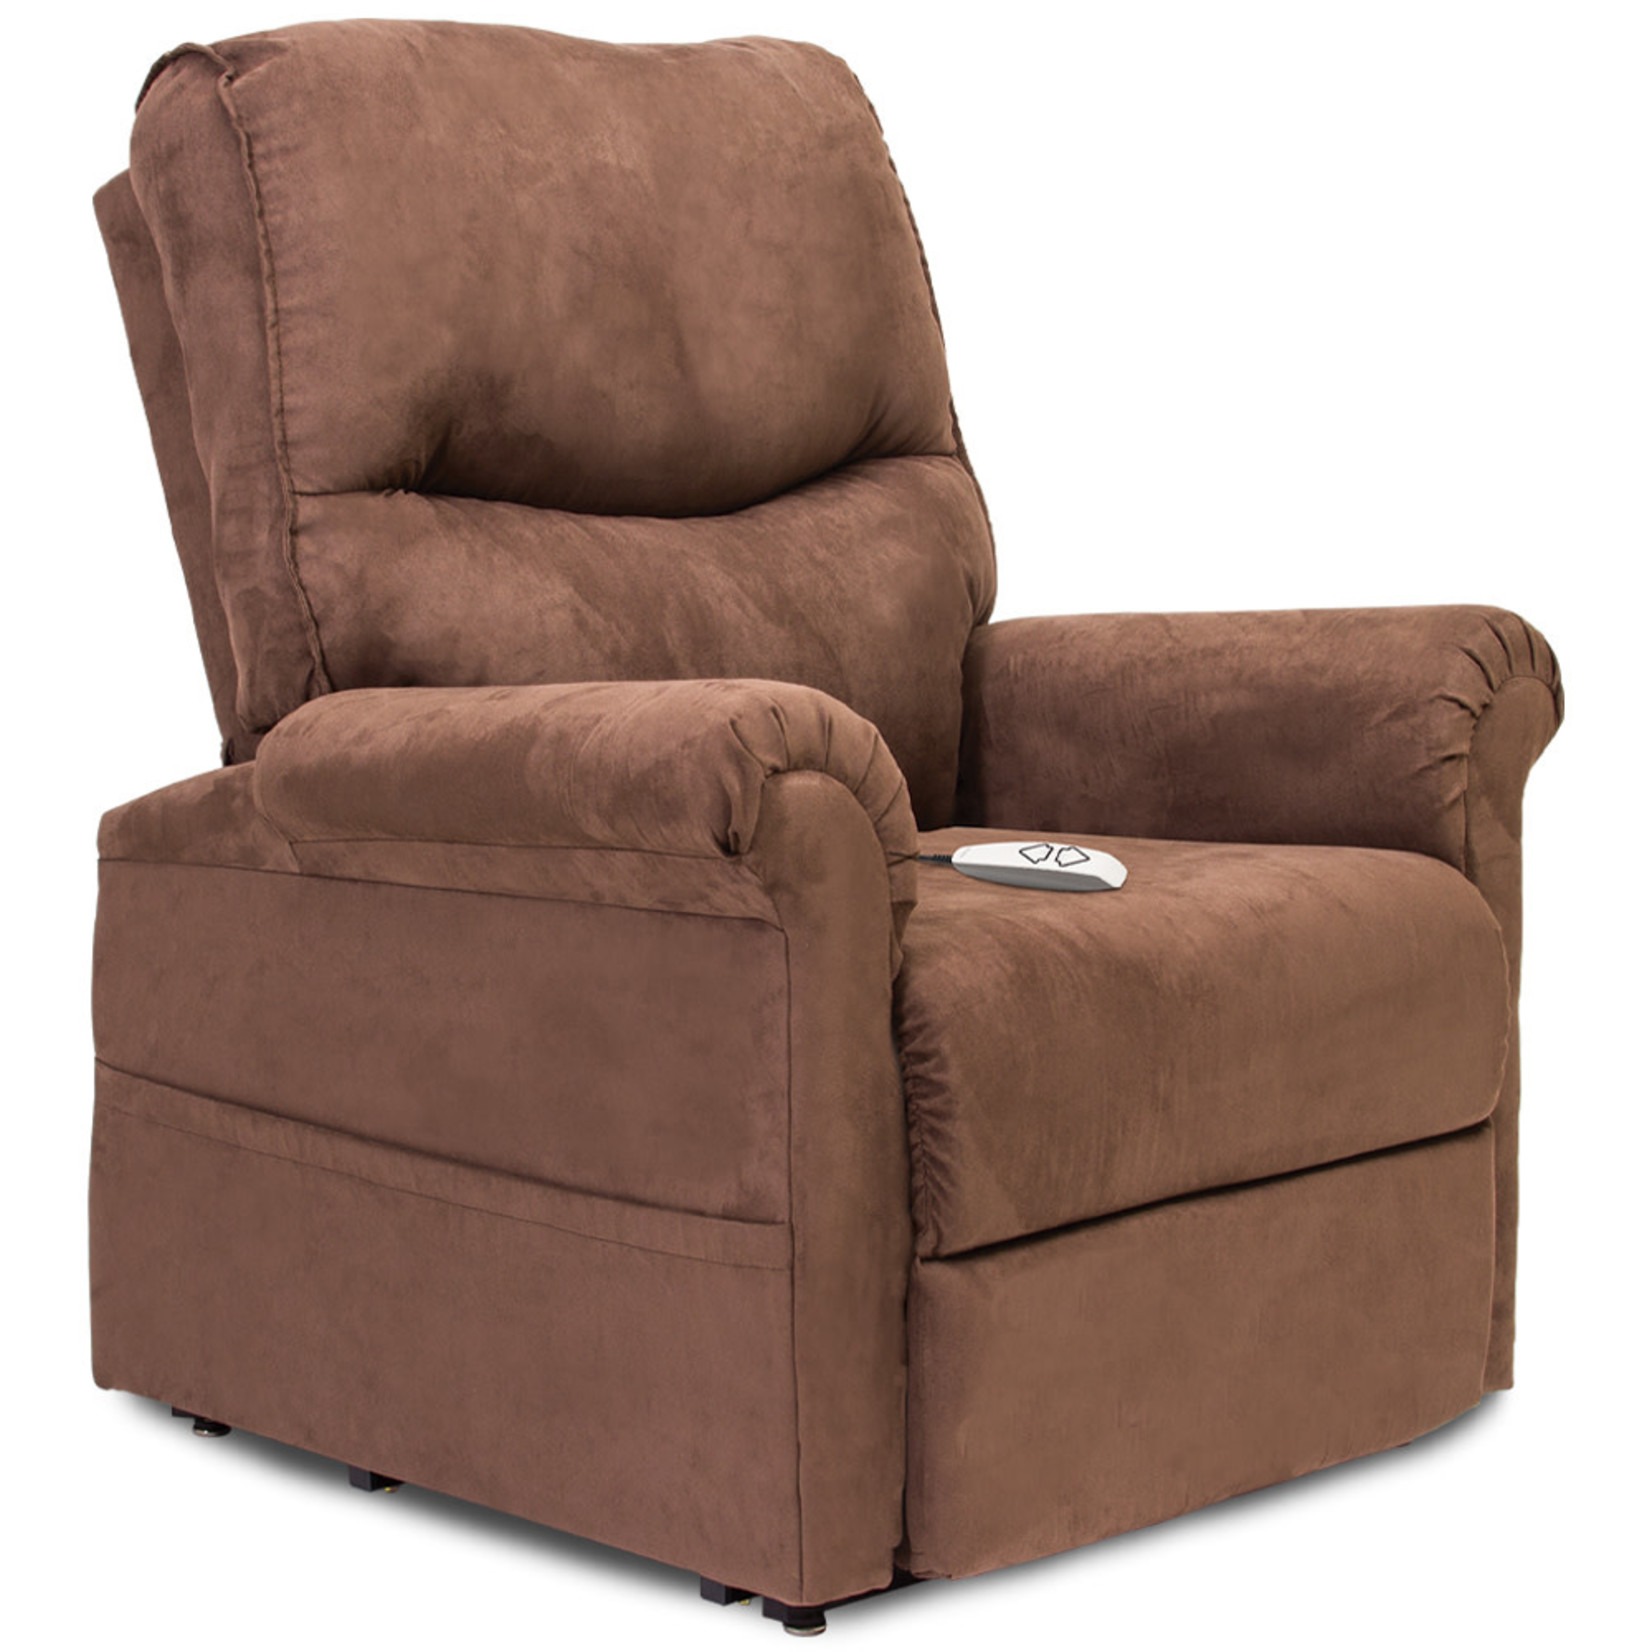 essential lc105 lift recliner shown in seated position